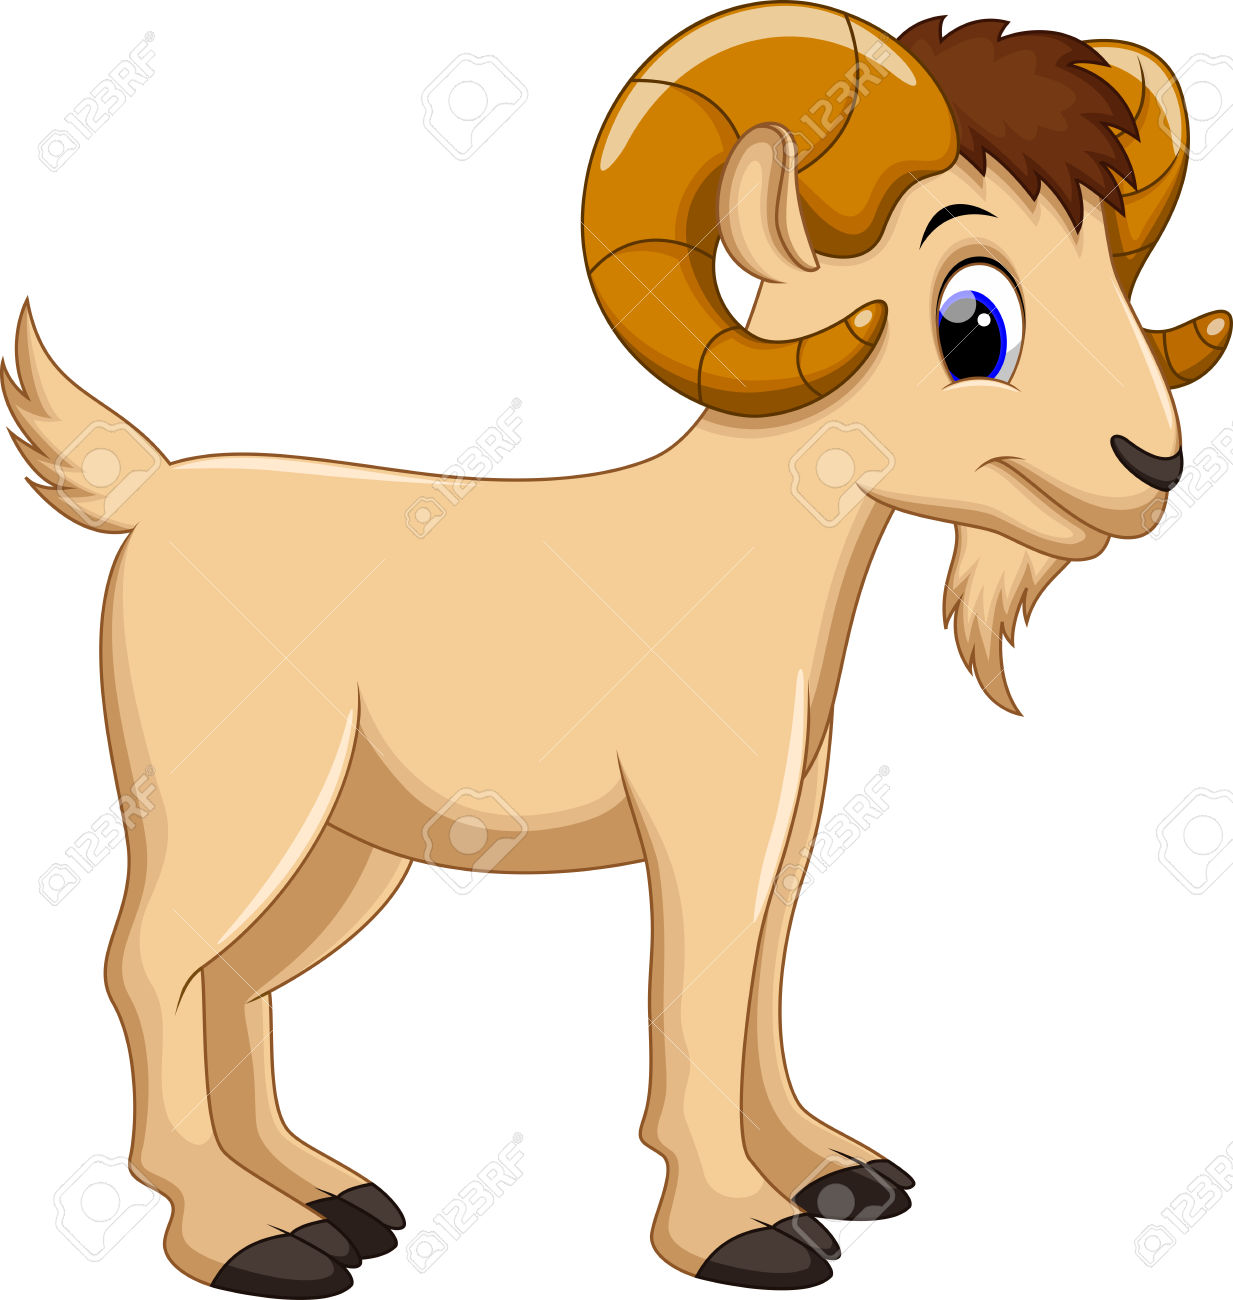 Animated Goat PNG - 159594